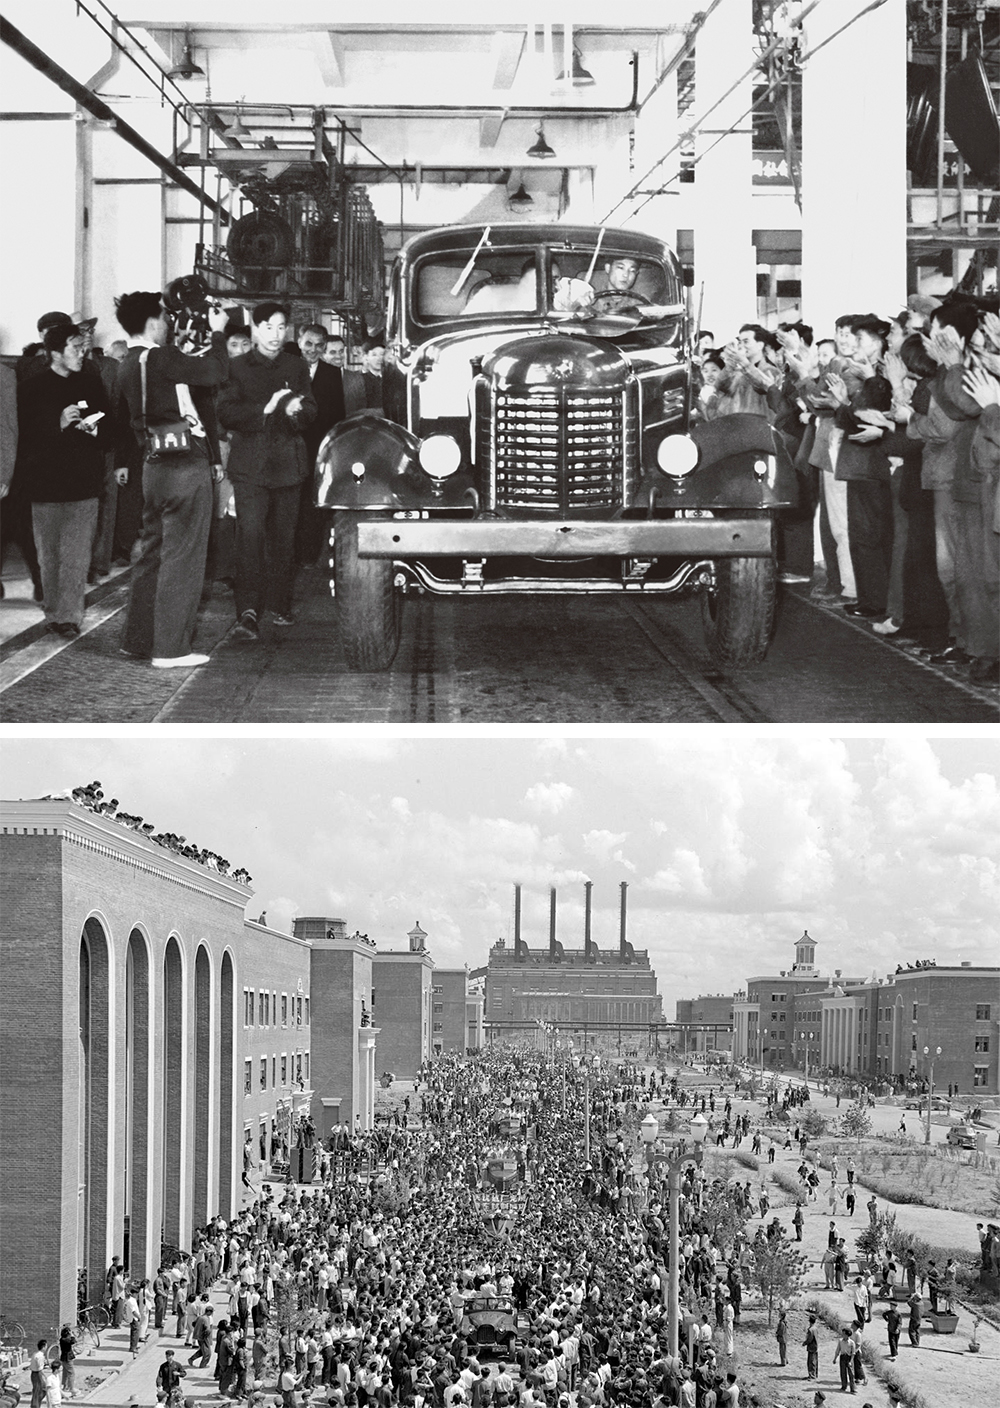 Combined file photos depict two significant moments at China FAW Group Corporation: the first batch of Jiefang trucks rolling off the assembly line (top) and FAW's employees celebrating the completion of these trucks (bottom) on July 13, 1956, in Changchun, northeast China's Jilin Province. /Xinhua